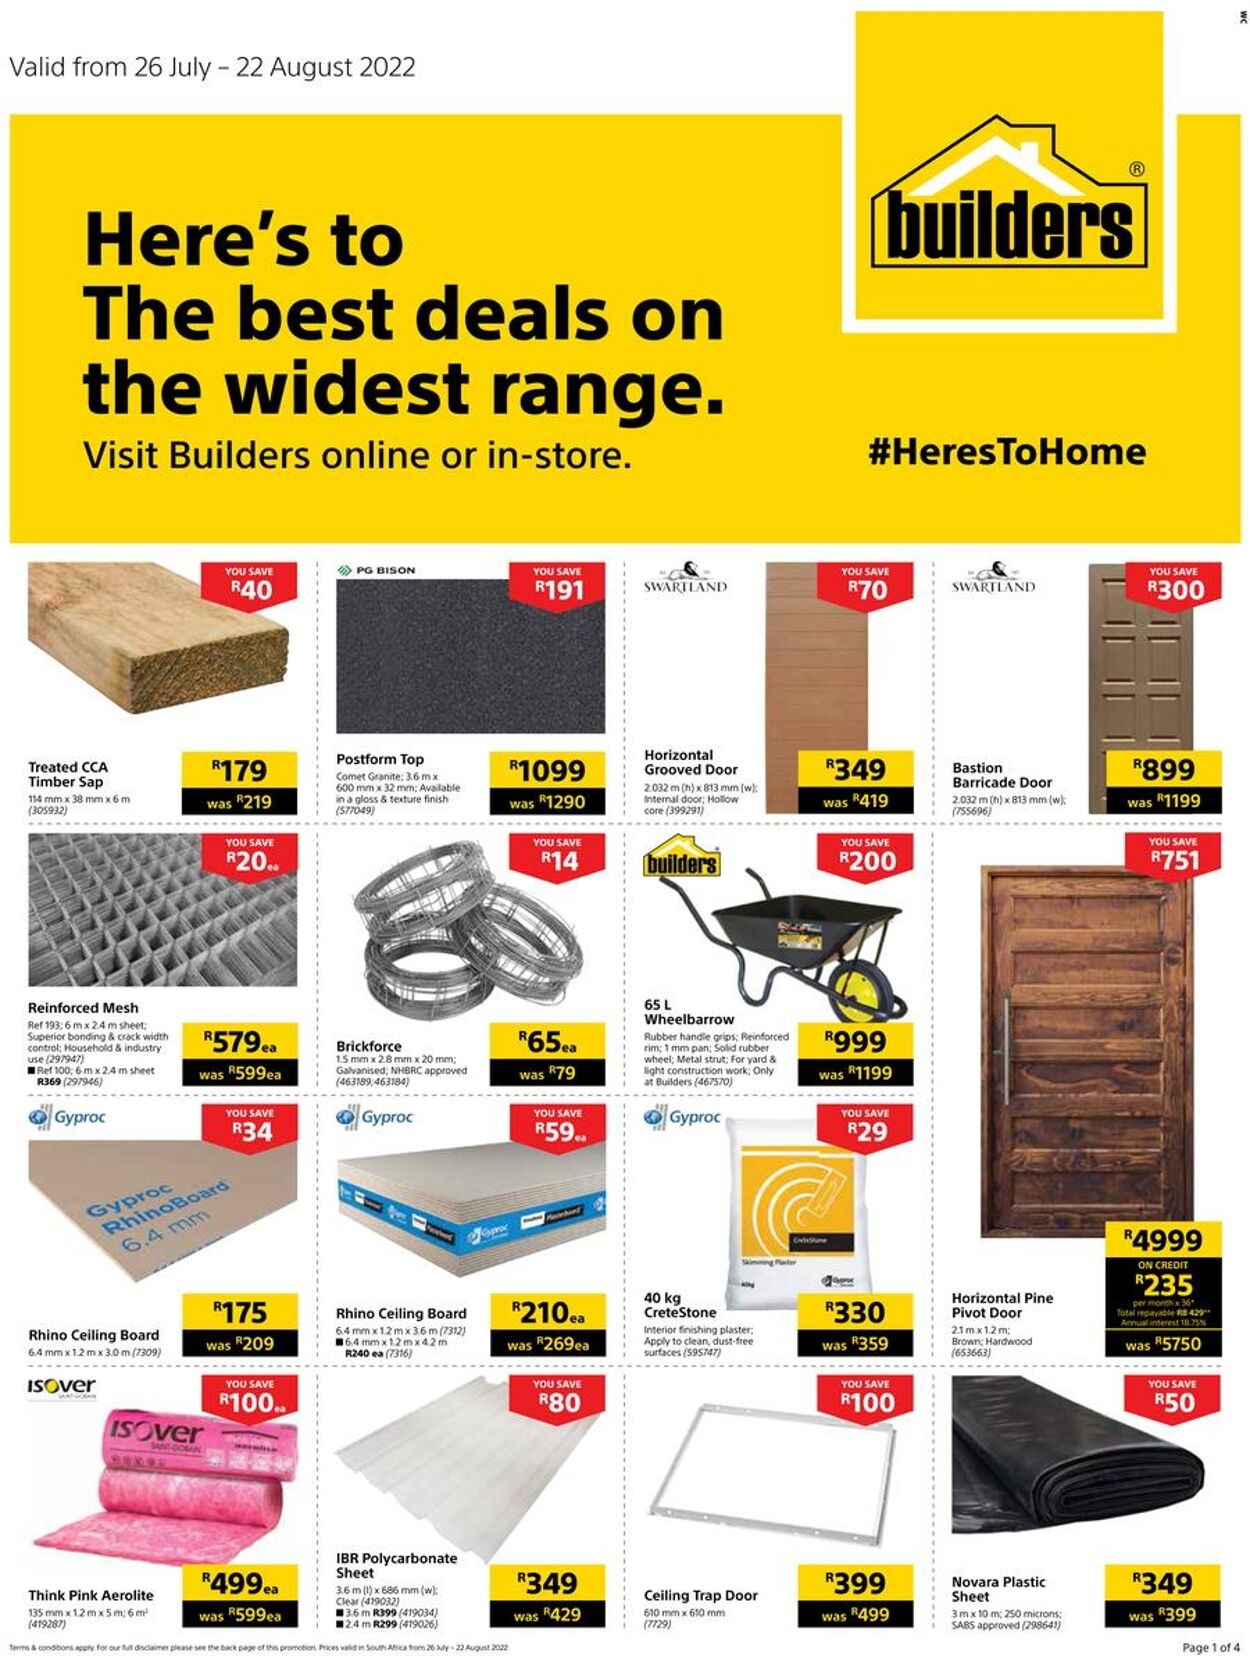 Special Builders Warehouse 26.07.2022-22.08.2022